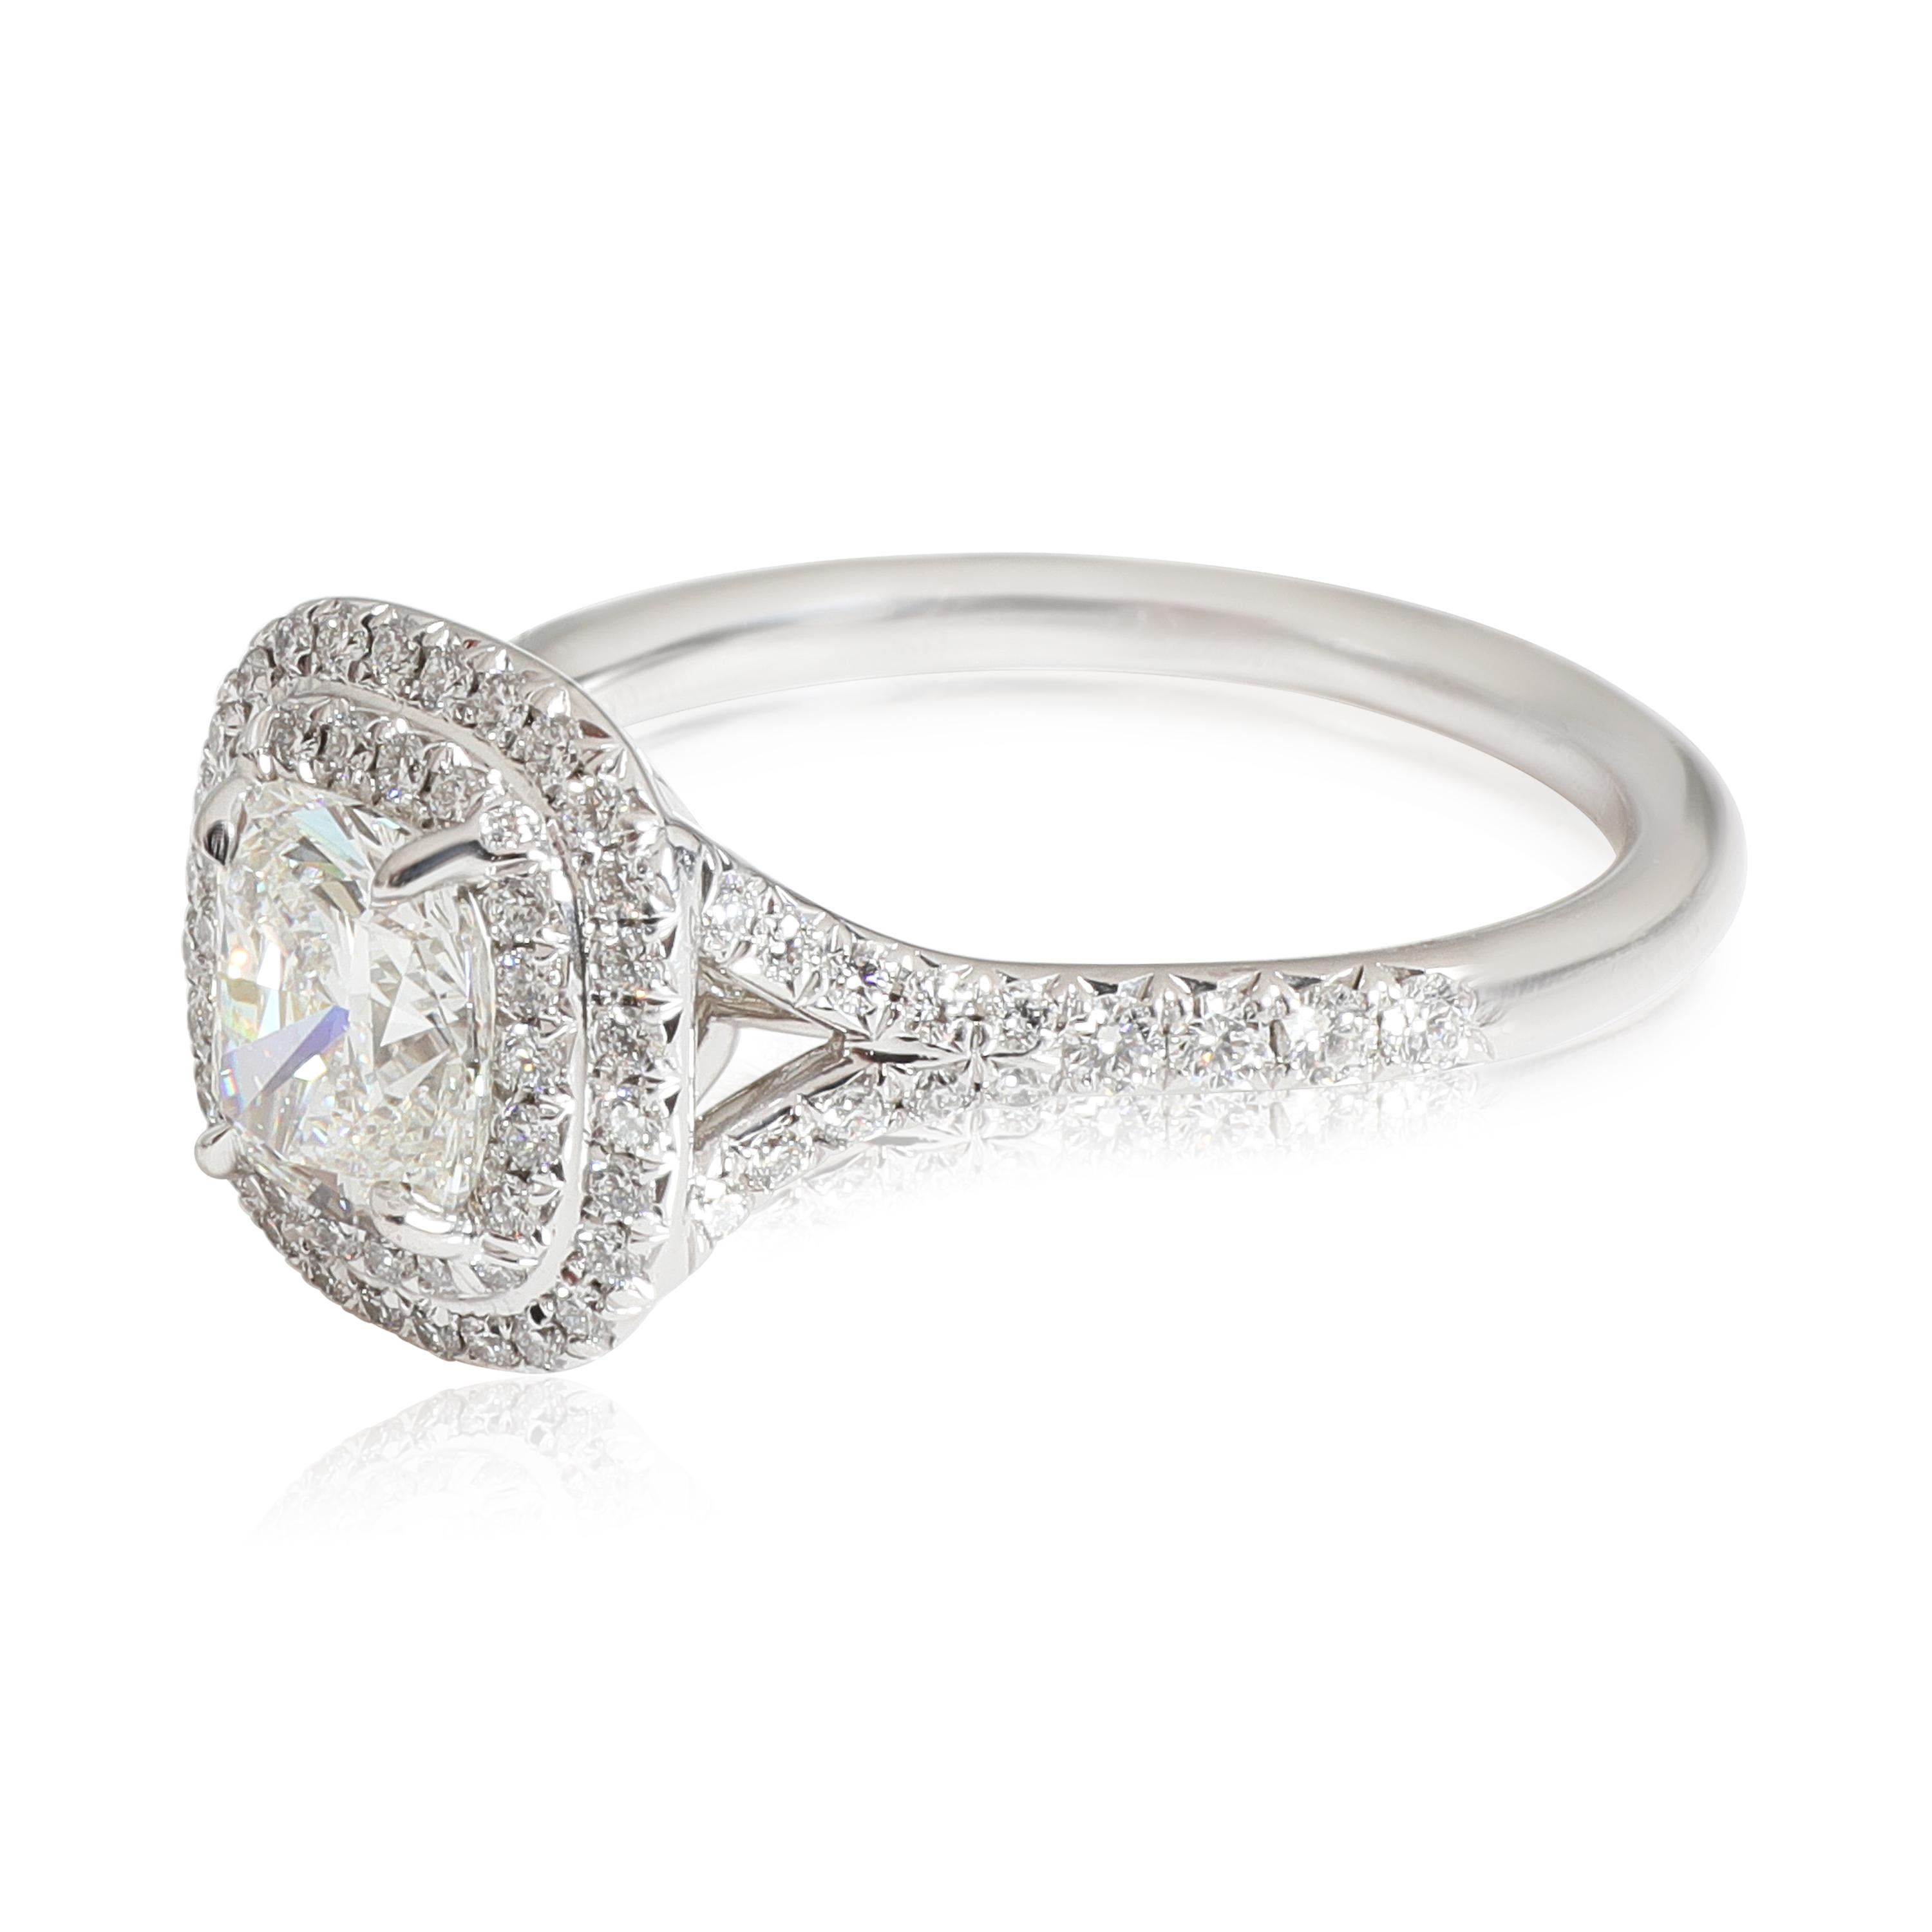 Tiffany & Co. Soleste Diamond  Engagement Ring in Platinum G VVS2 1.40 CTW

PRIMARY DETAILS
SKU: 117171
Listing Title: Tiffany & Co. Soleste Diamond  Engagement Ring in Platinum G VVS2 1.40 CTW
Condition Description: Retails for 20700 USD. In